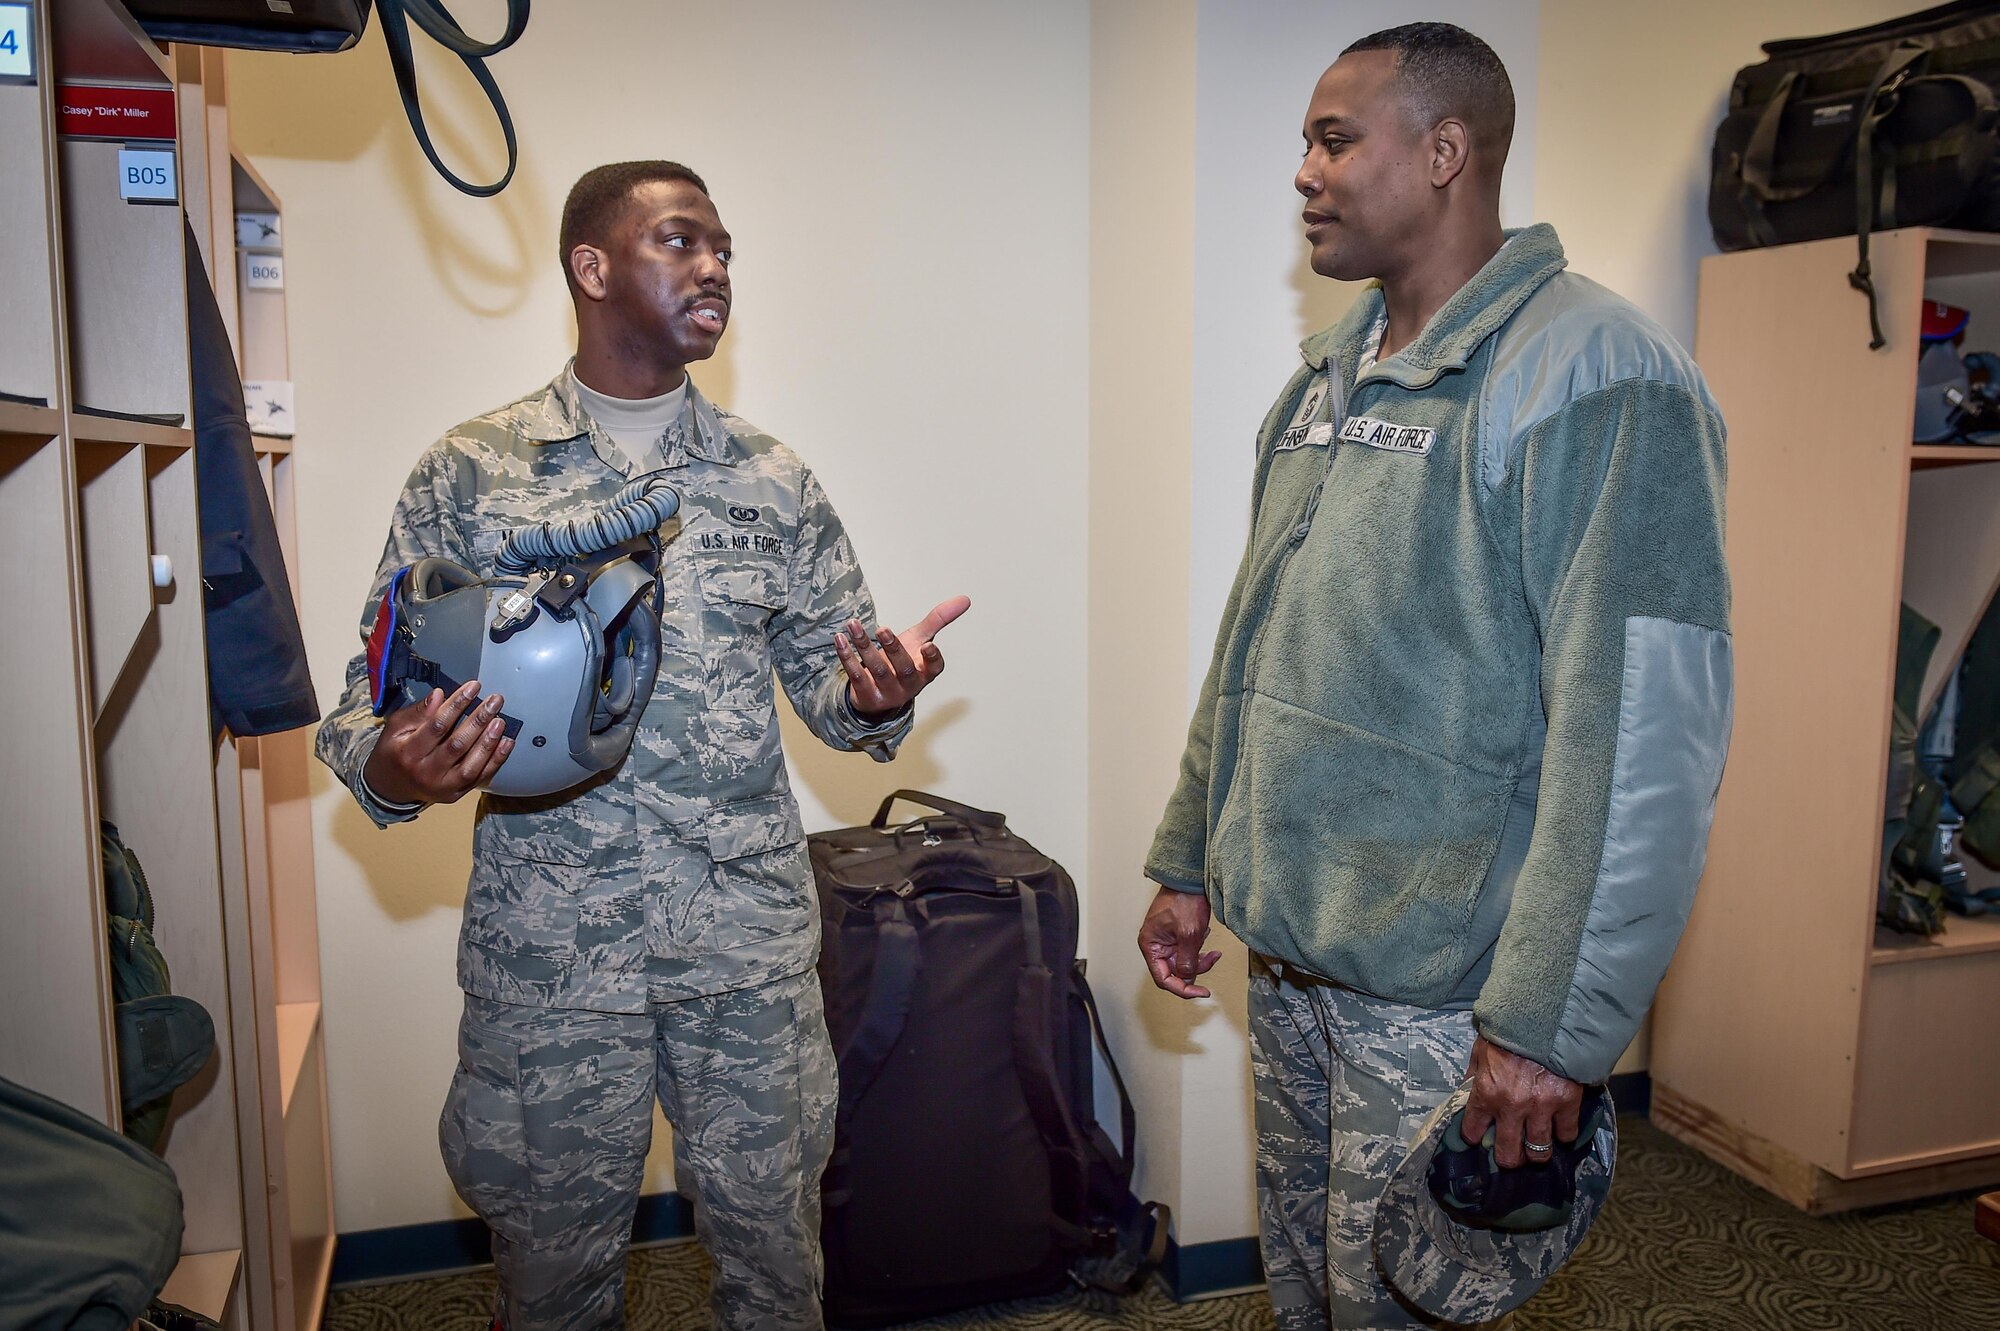 U.S. Air Force Staff Sgt. Richard Miller, assigned to the 3rd Operations Support Squadron, left, talks with Chief Master Sgt. Anthony Johnson, Pacific Air Forces (PACAF) command chief, at the 525th Fighter Squadron on Joint Base Elmendorf-Richardson, Alaska, as Johnson toured the base, Feb. 7, 2017. PACAF leadership toured various facilities throughout the installation to meet with Airmen and get a first-hand look at the broad spectrum of JBER mission sets.